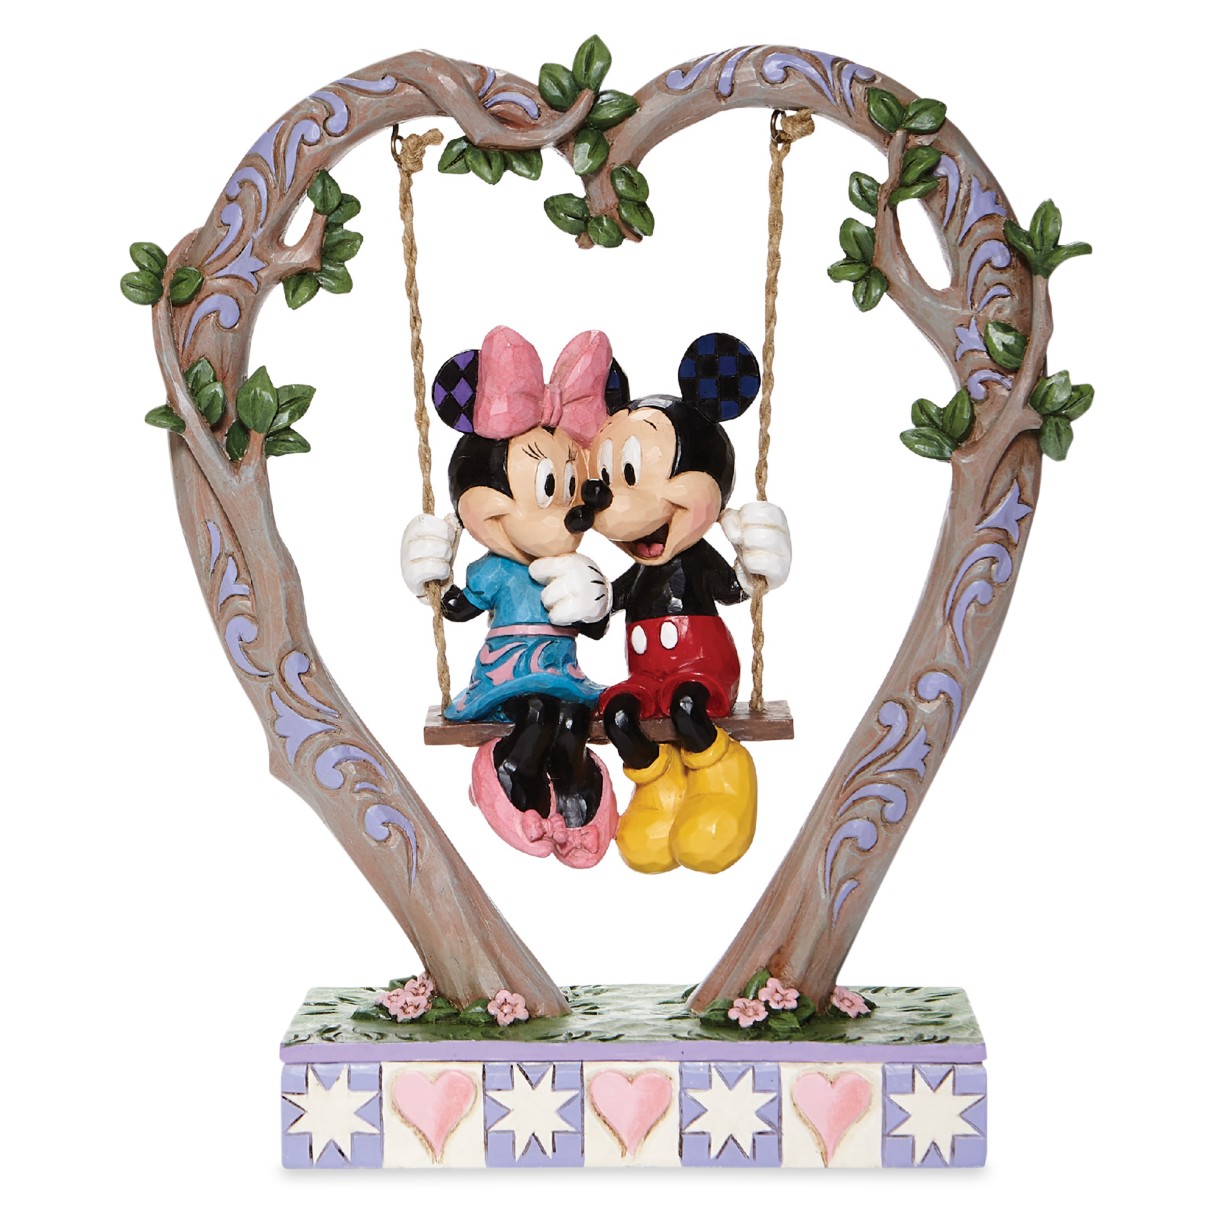 Mickey and Minnie Mouse ''Sweethearts in Swing'' Figure by Jim Shore